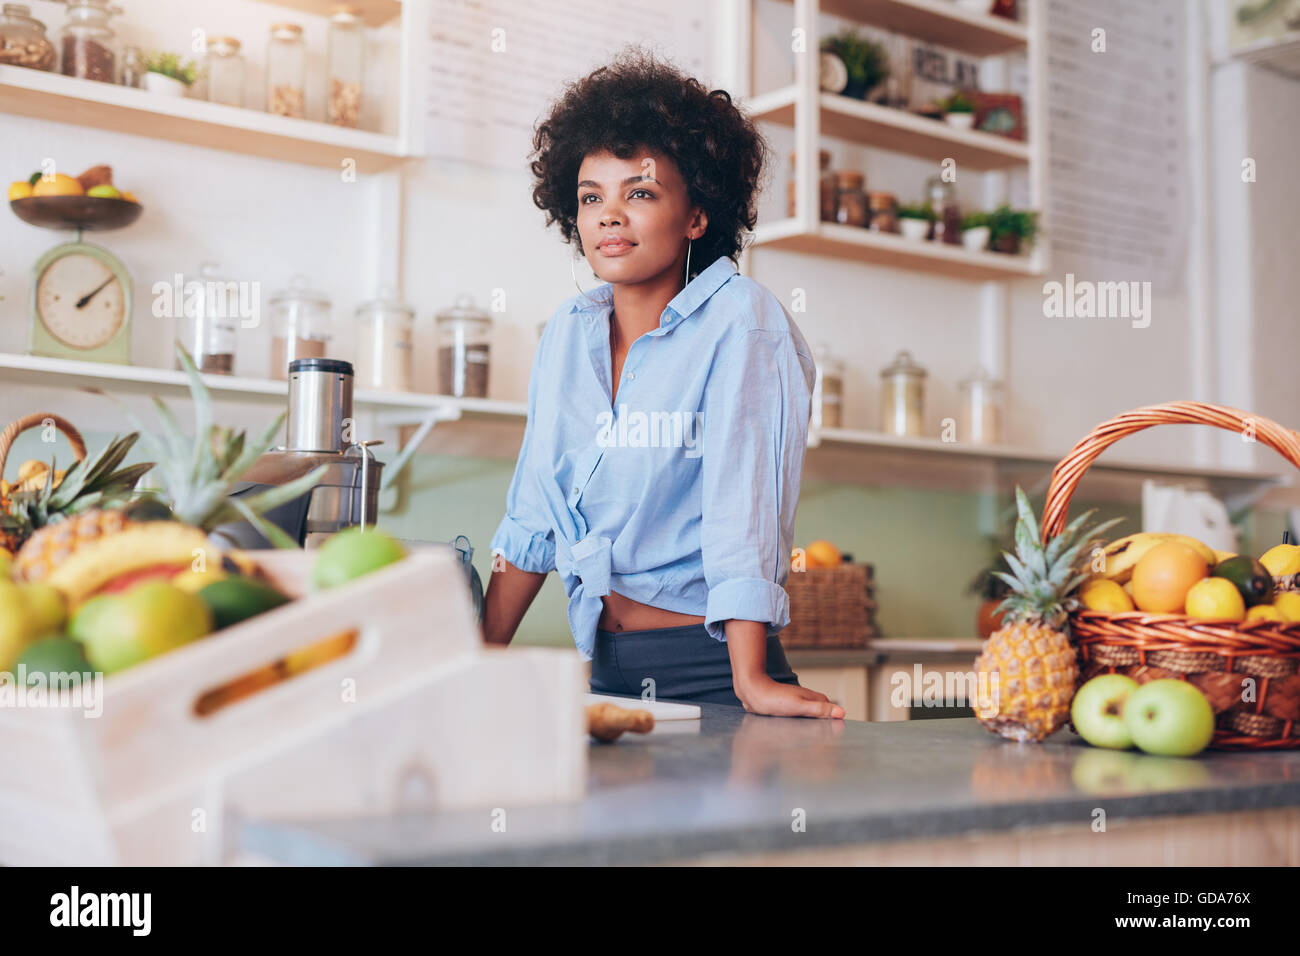 Portrait of attractive young woman standing at juice bar counter. African female employee at juice bar looking away. Stock Photo